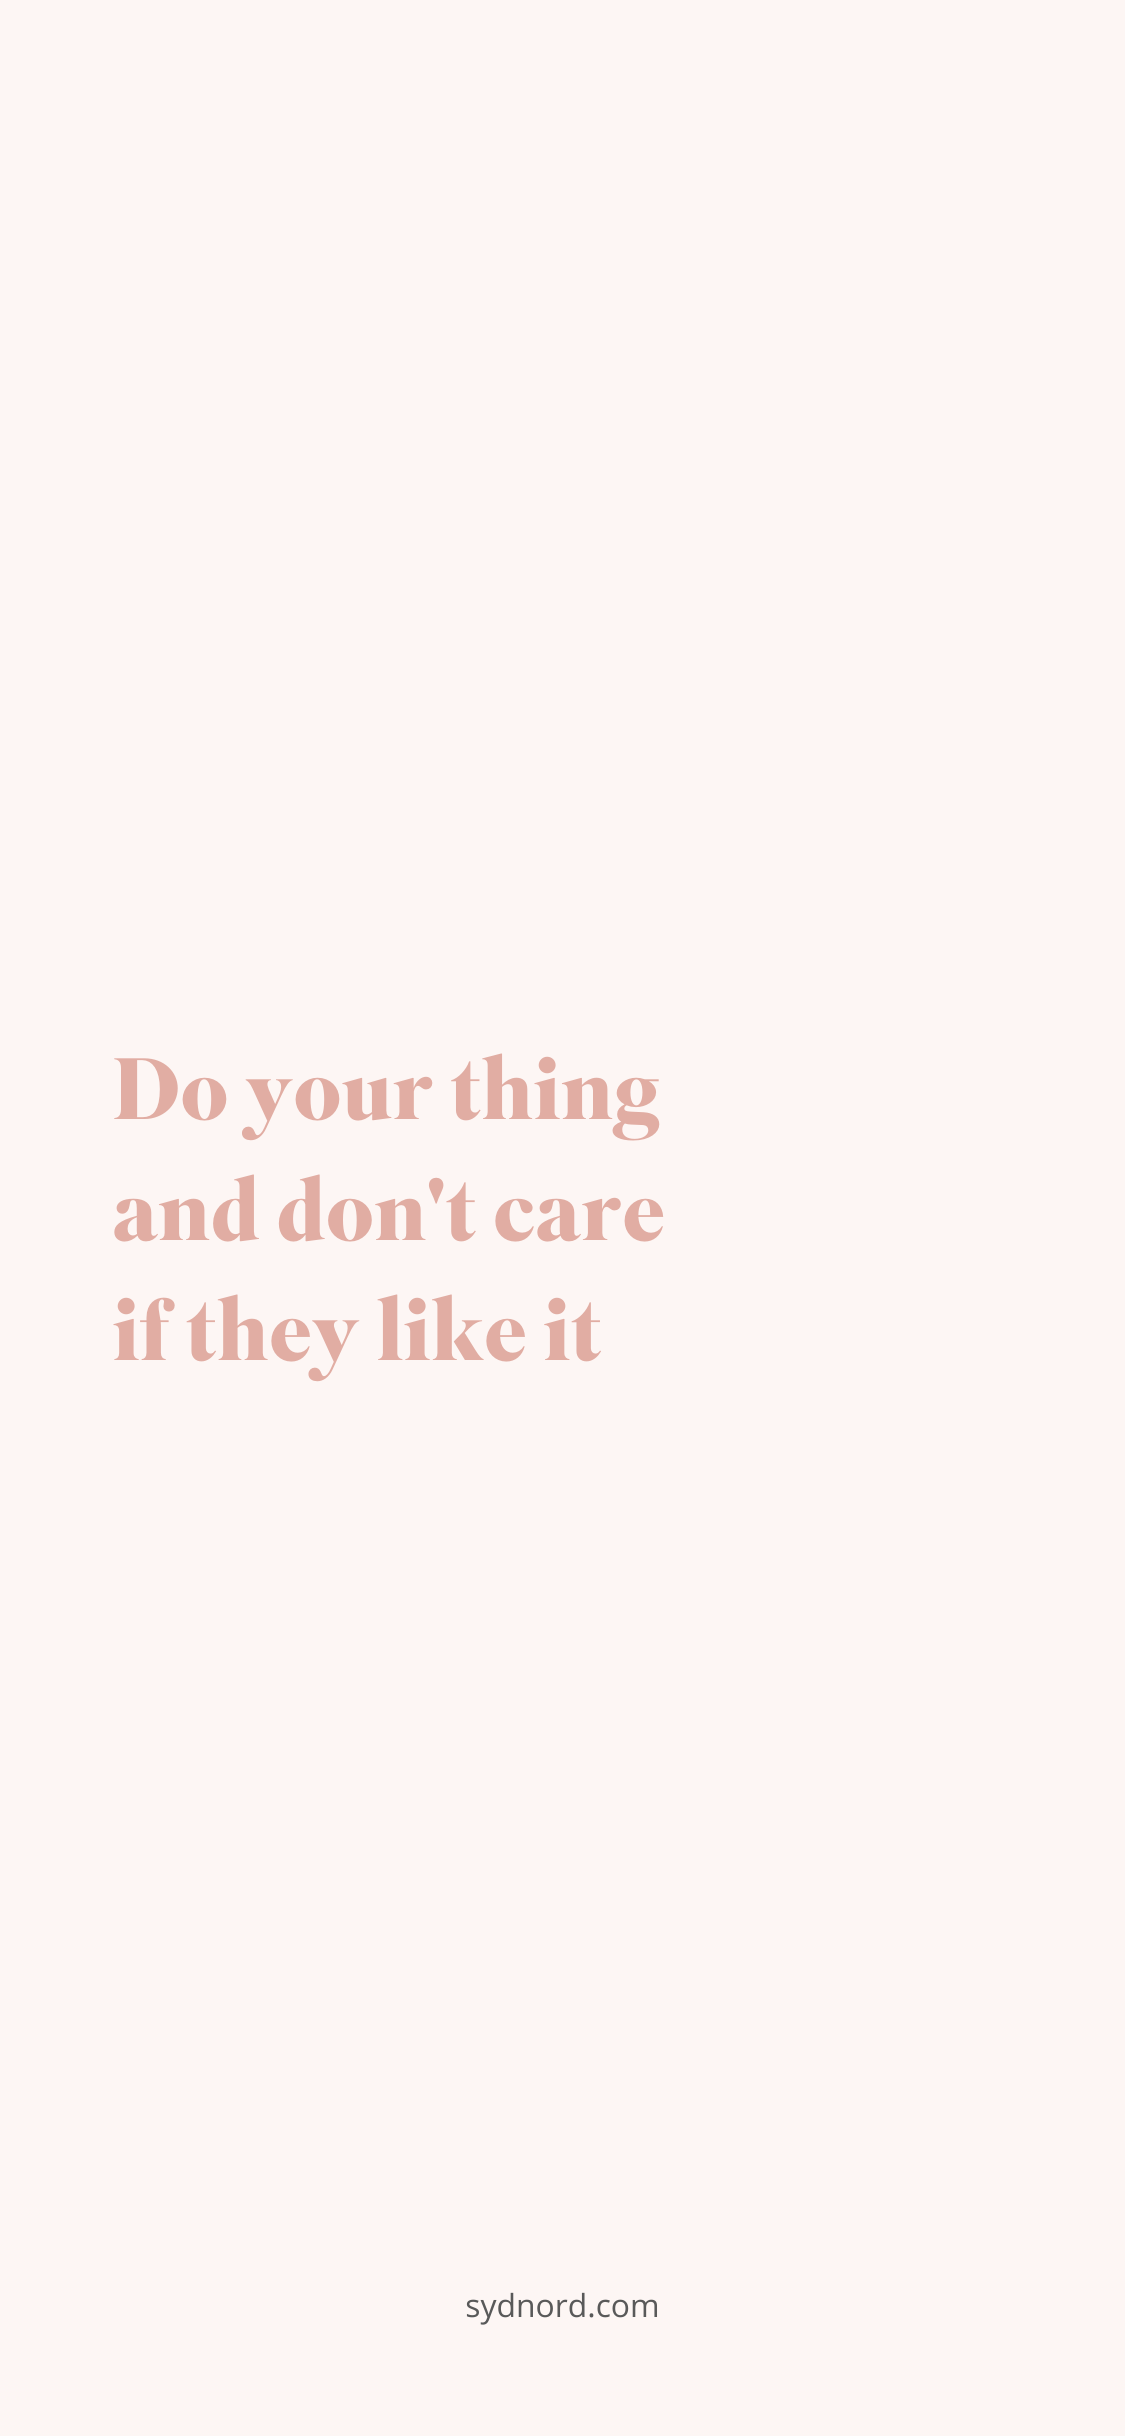 Positive quote: Do your thing and don't care if they like it